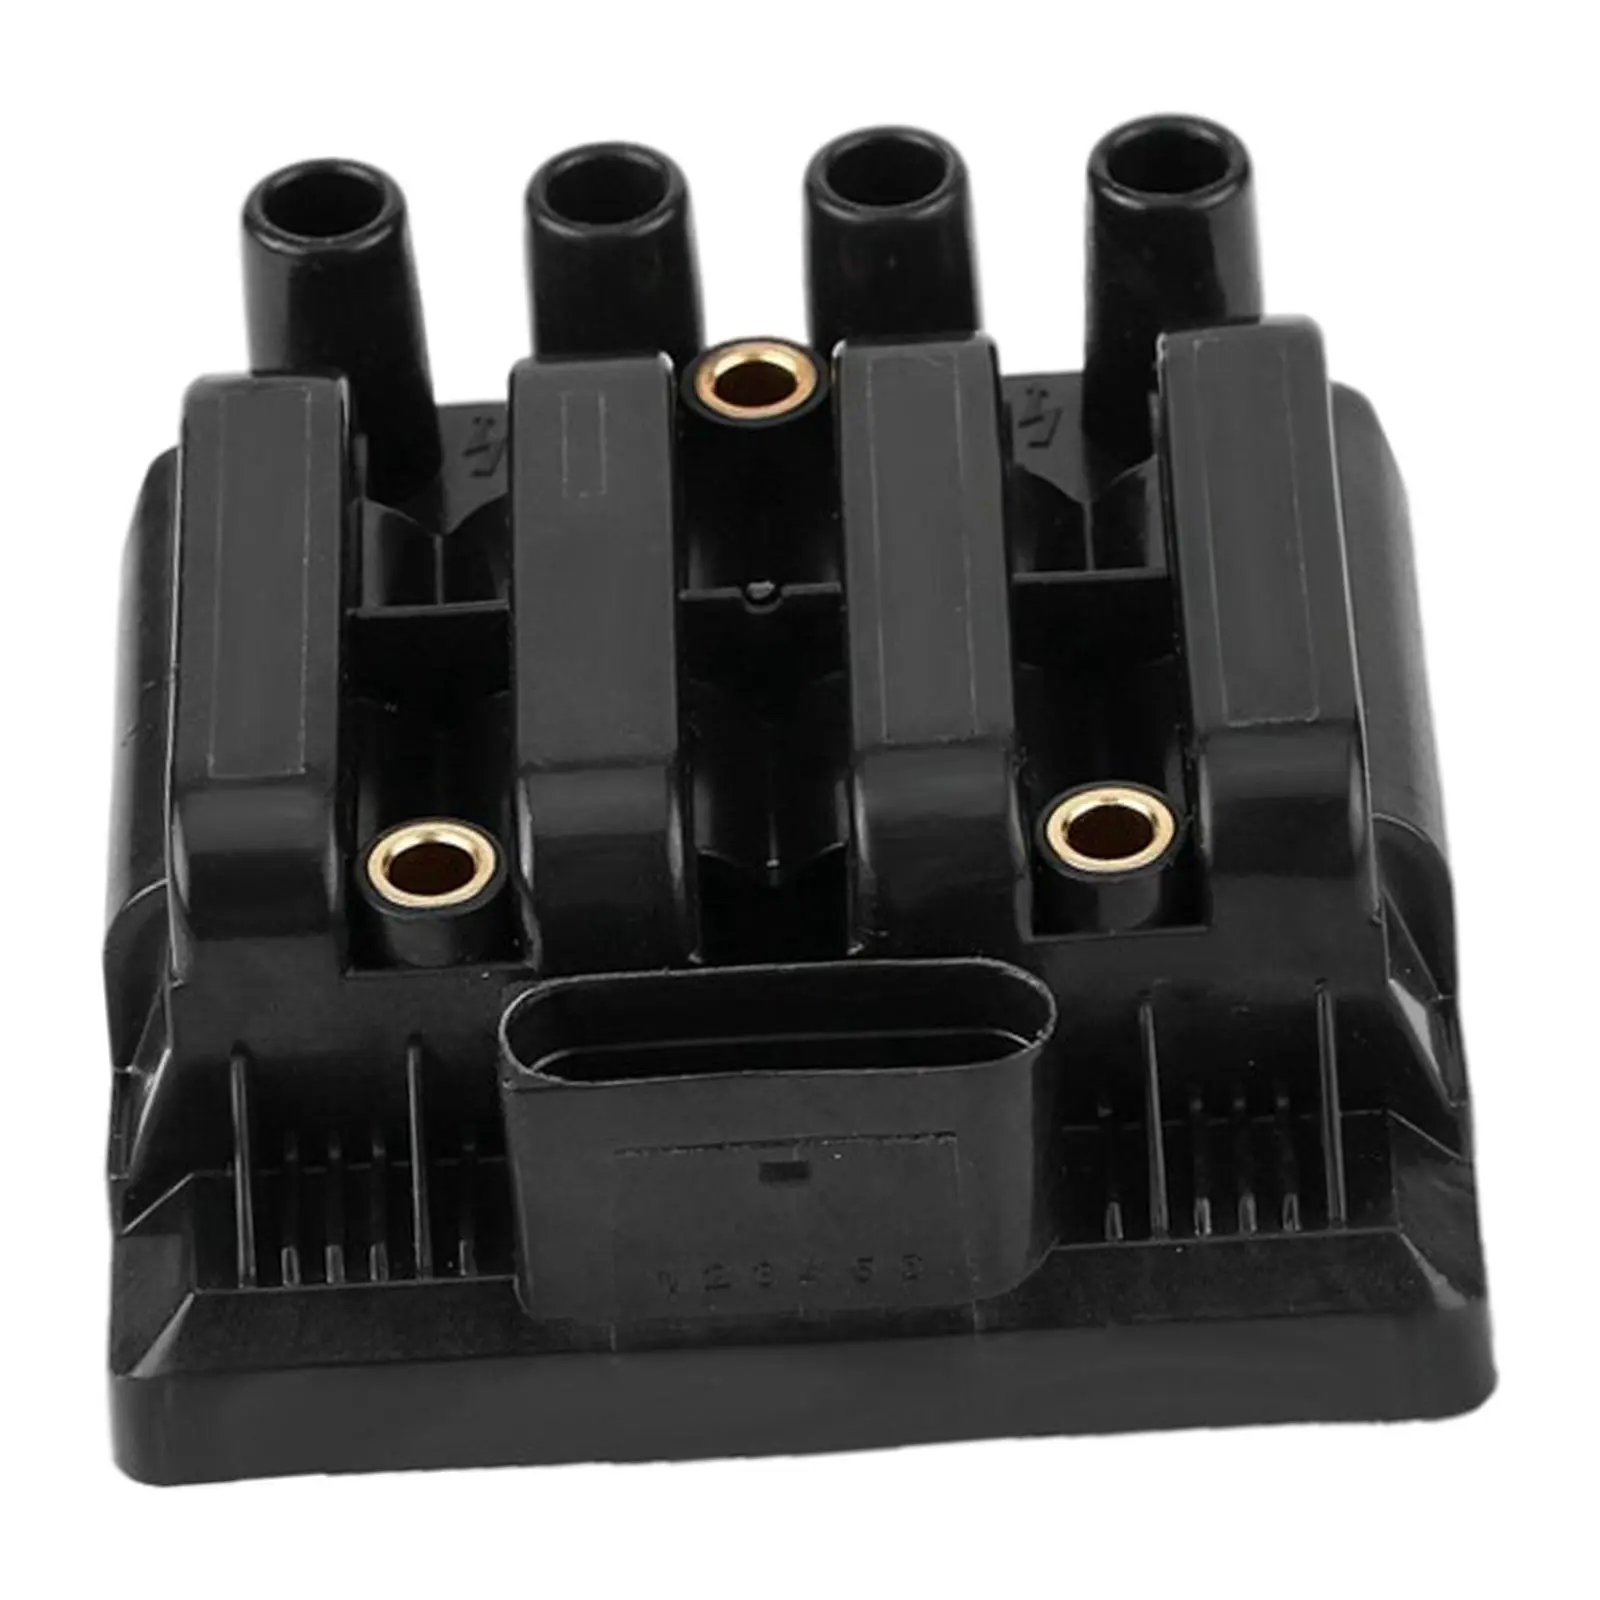 Car Ignition Coil UF484 Replacement For VW Jetta Beetle L4 2.0L C1393 2003 2004